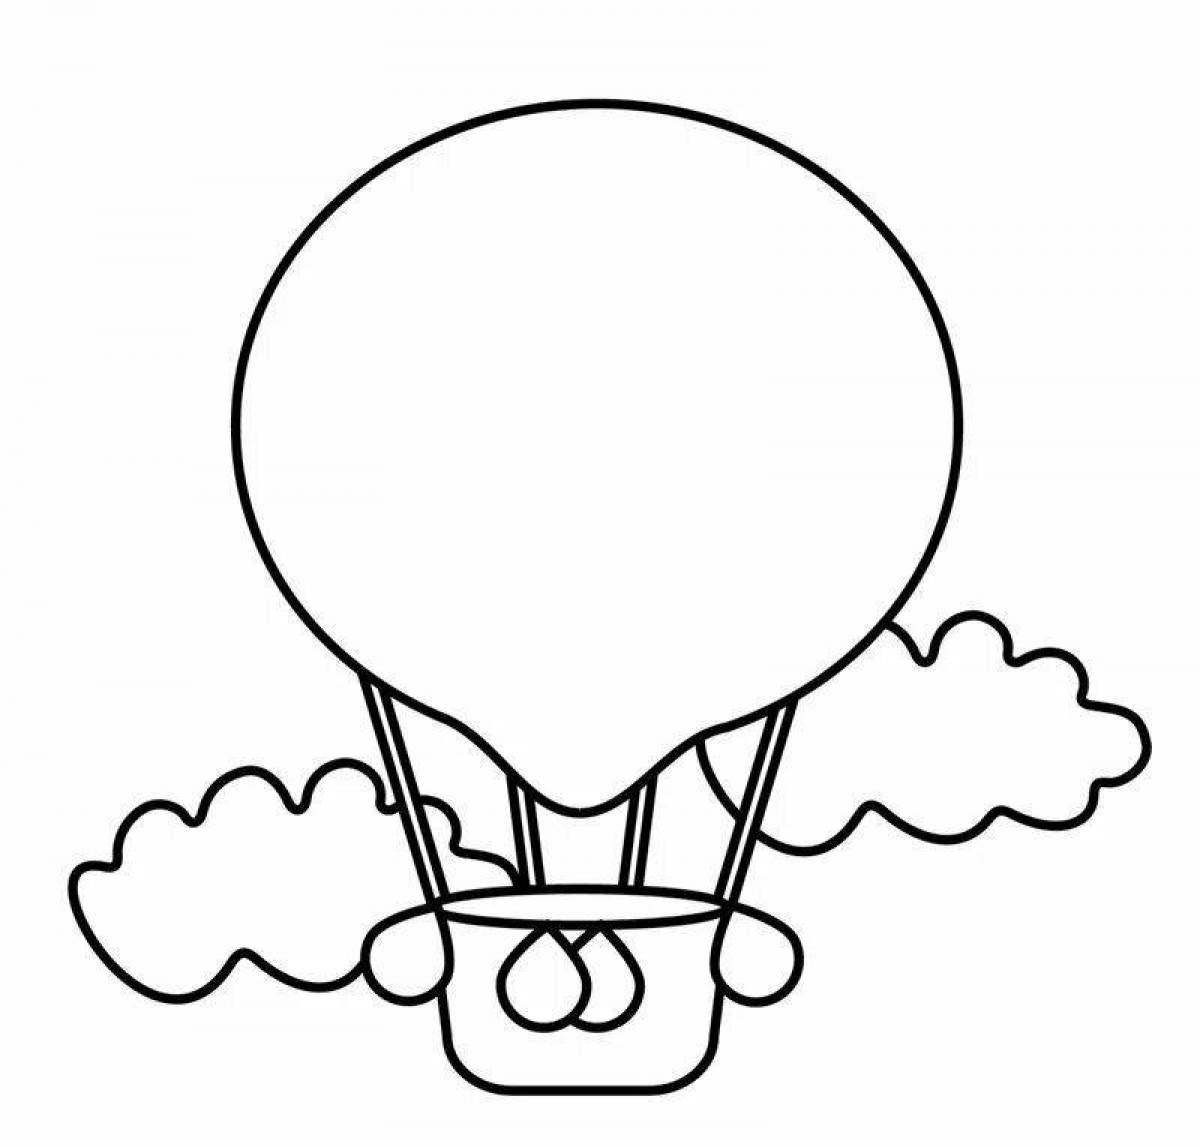 Joyful balloon with basket coloring book for kids